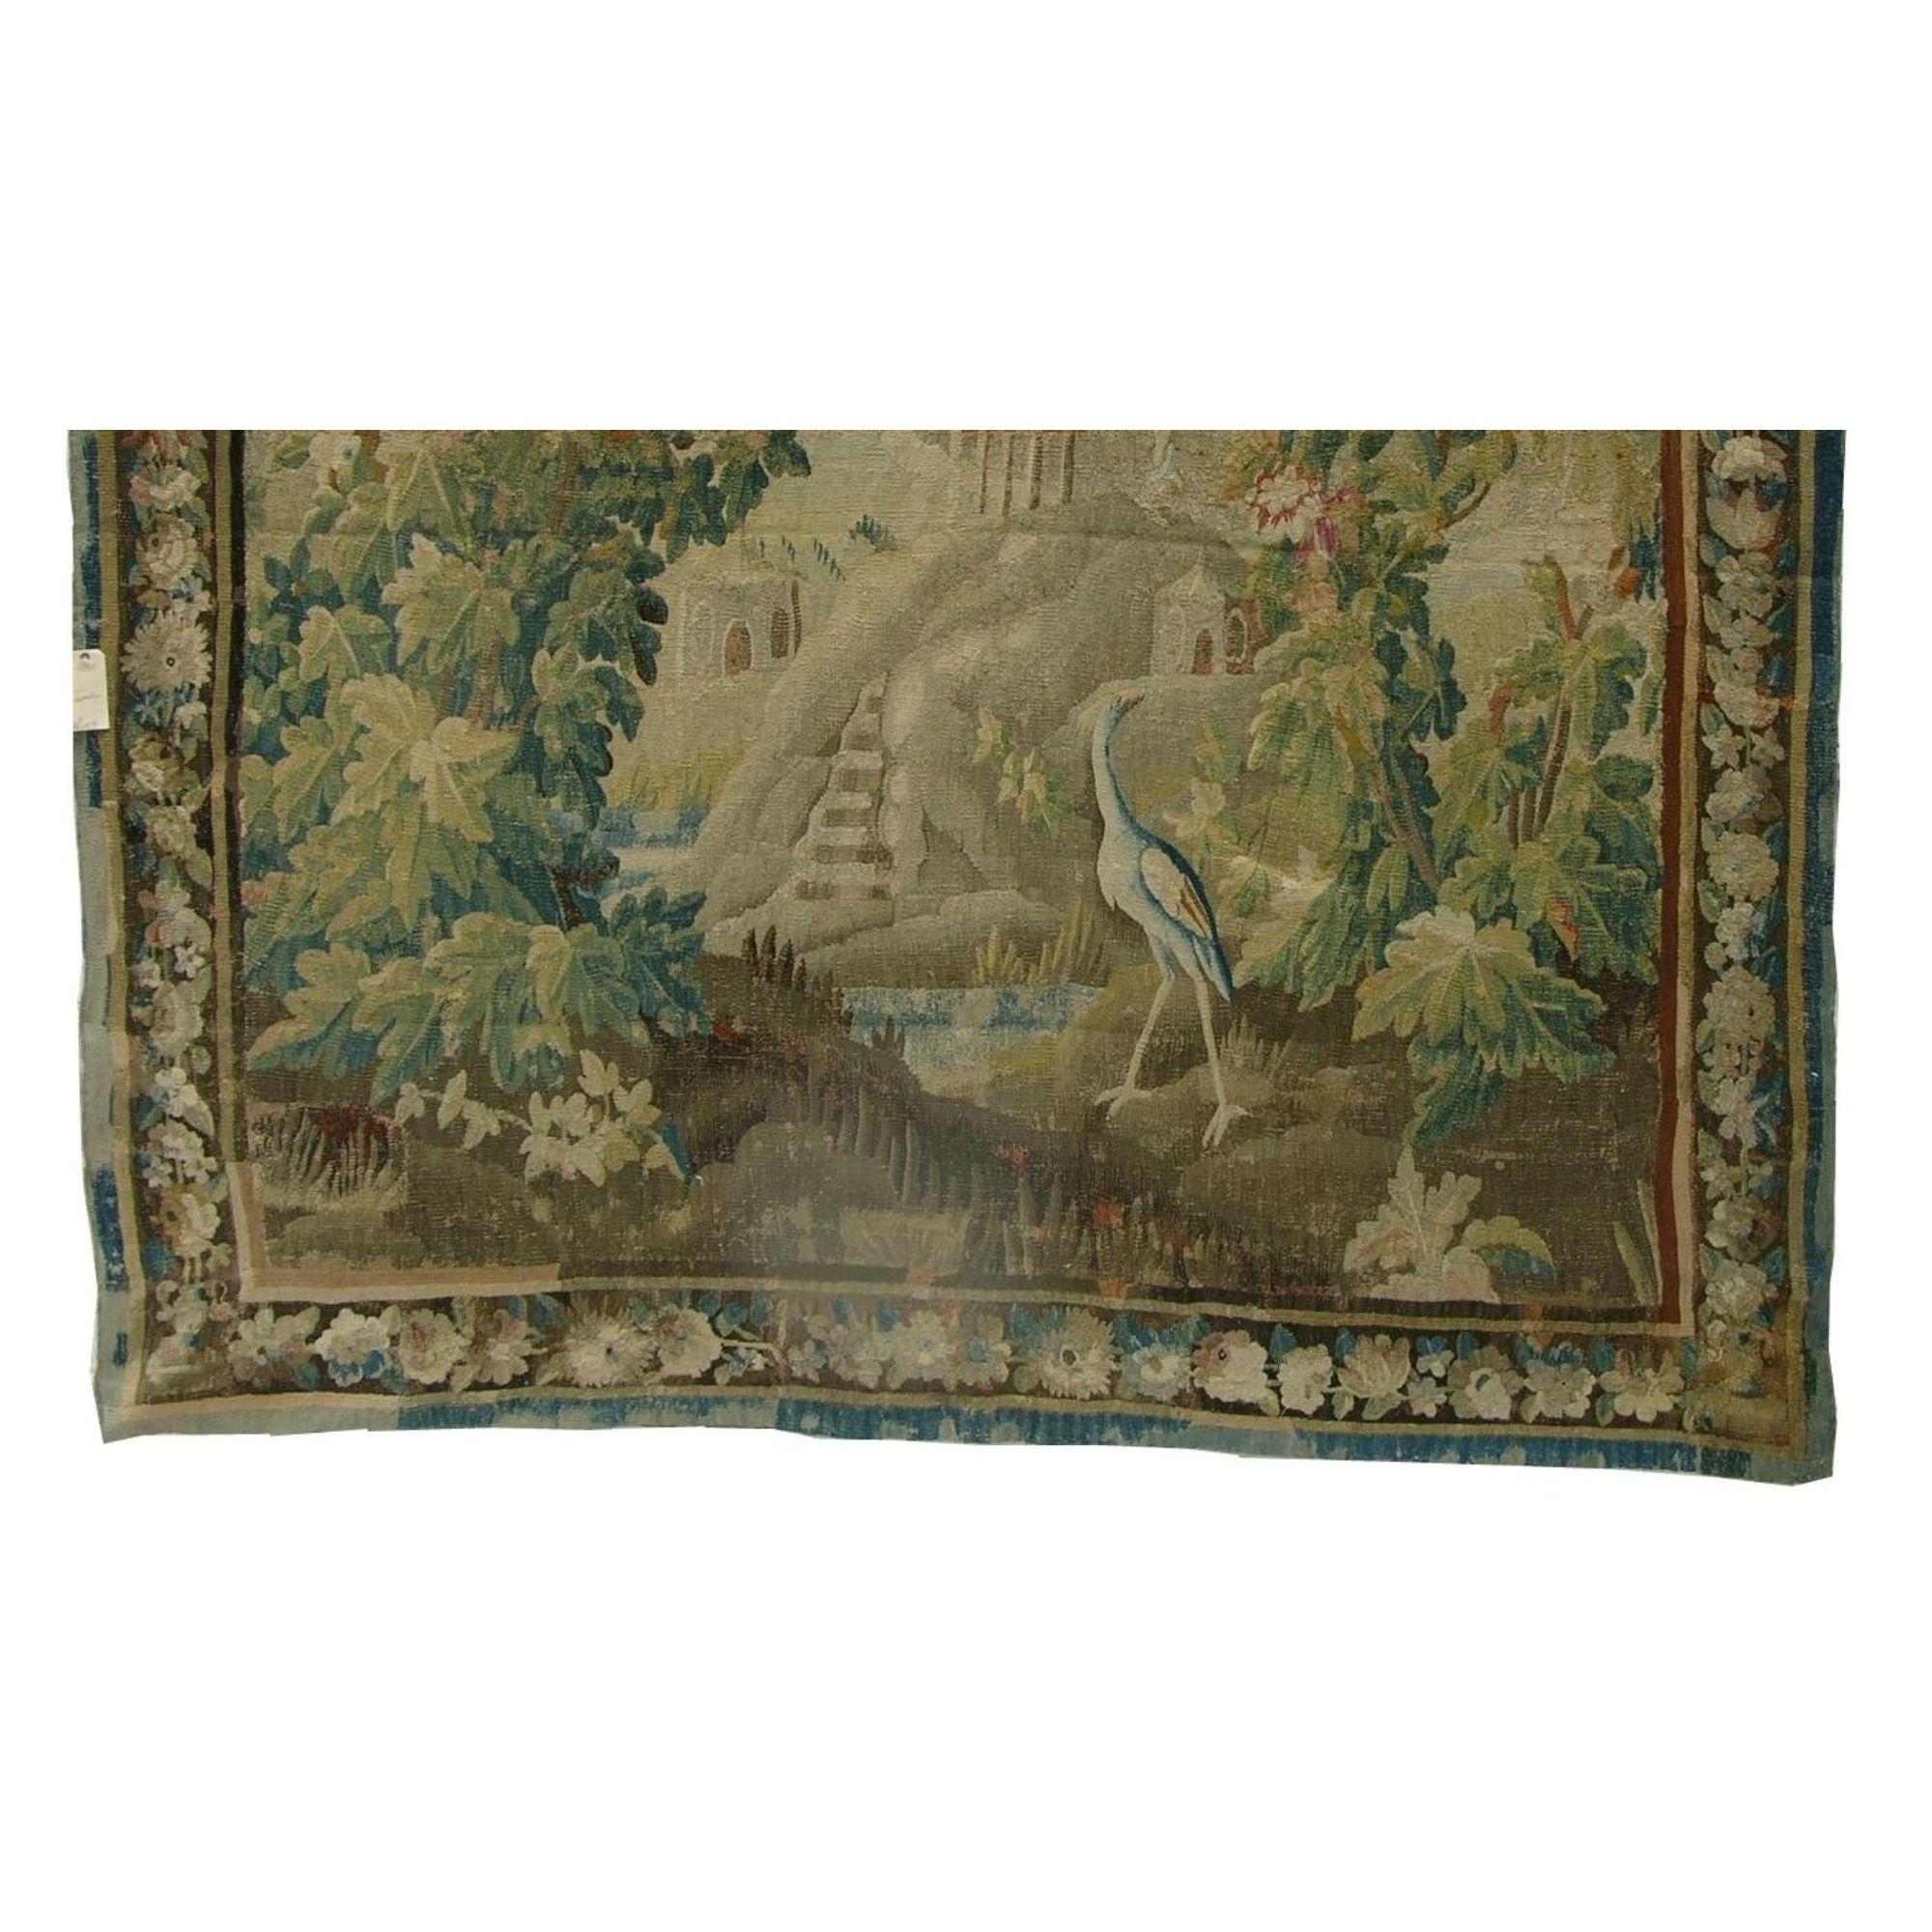 Unknown 17th Century Antique Flemish Tapestry 9' X 8'6